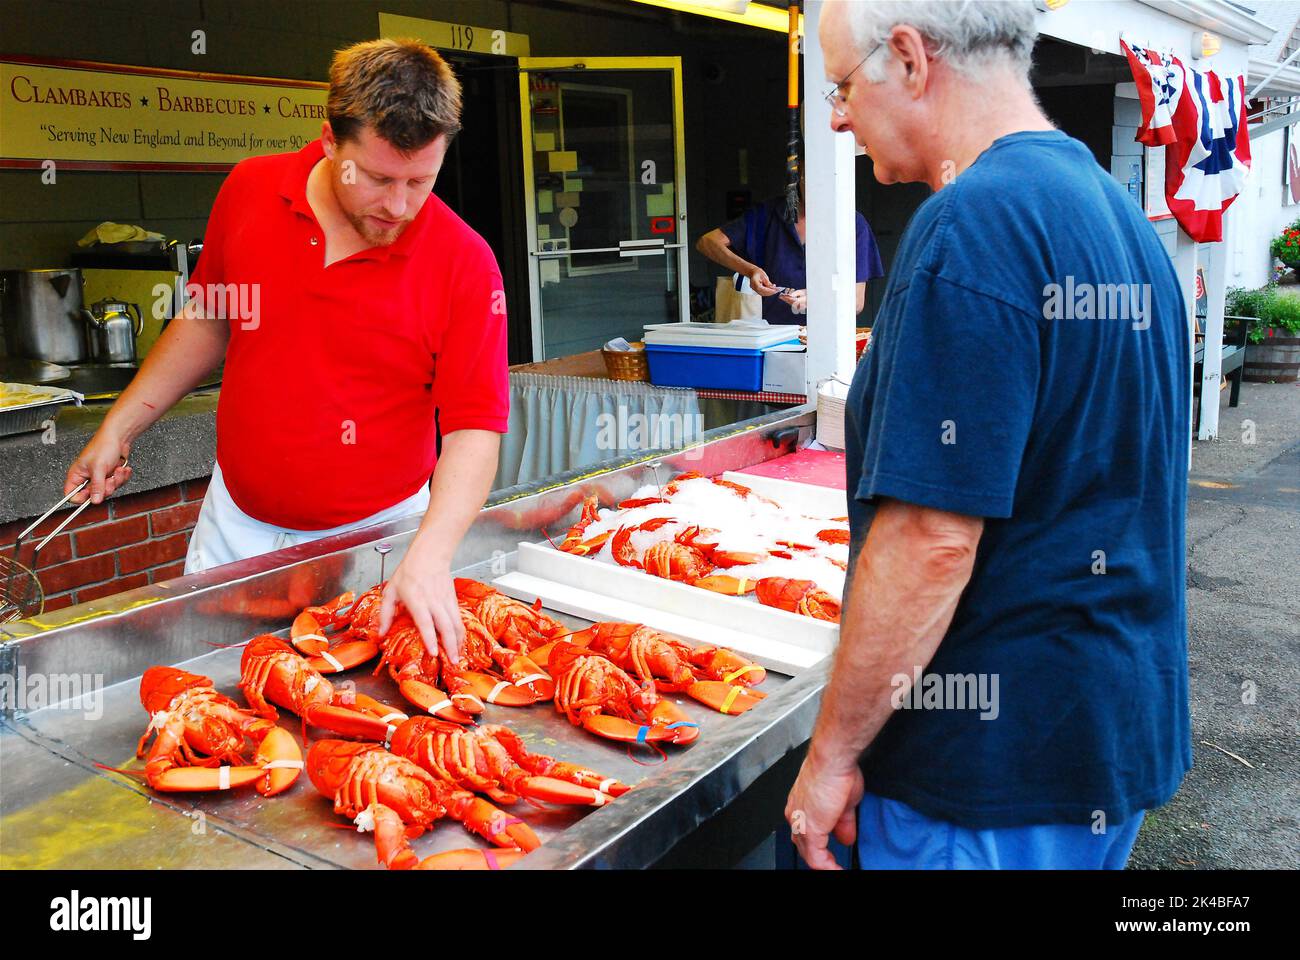 A male worker advises a customer's decision on the selection of lobsters available to choose at a seafood restaurant in New England Stock Photo